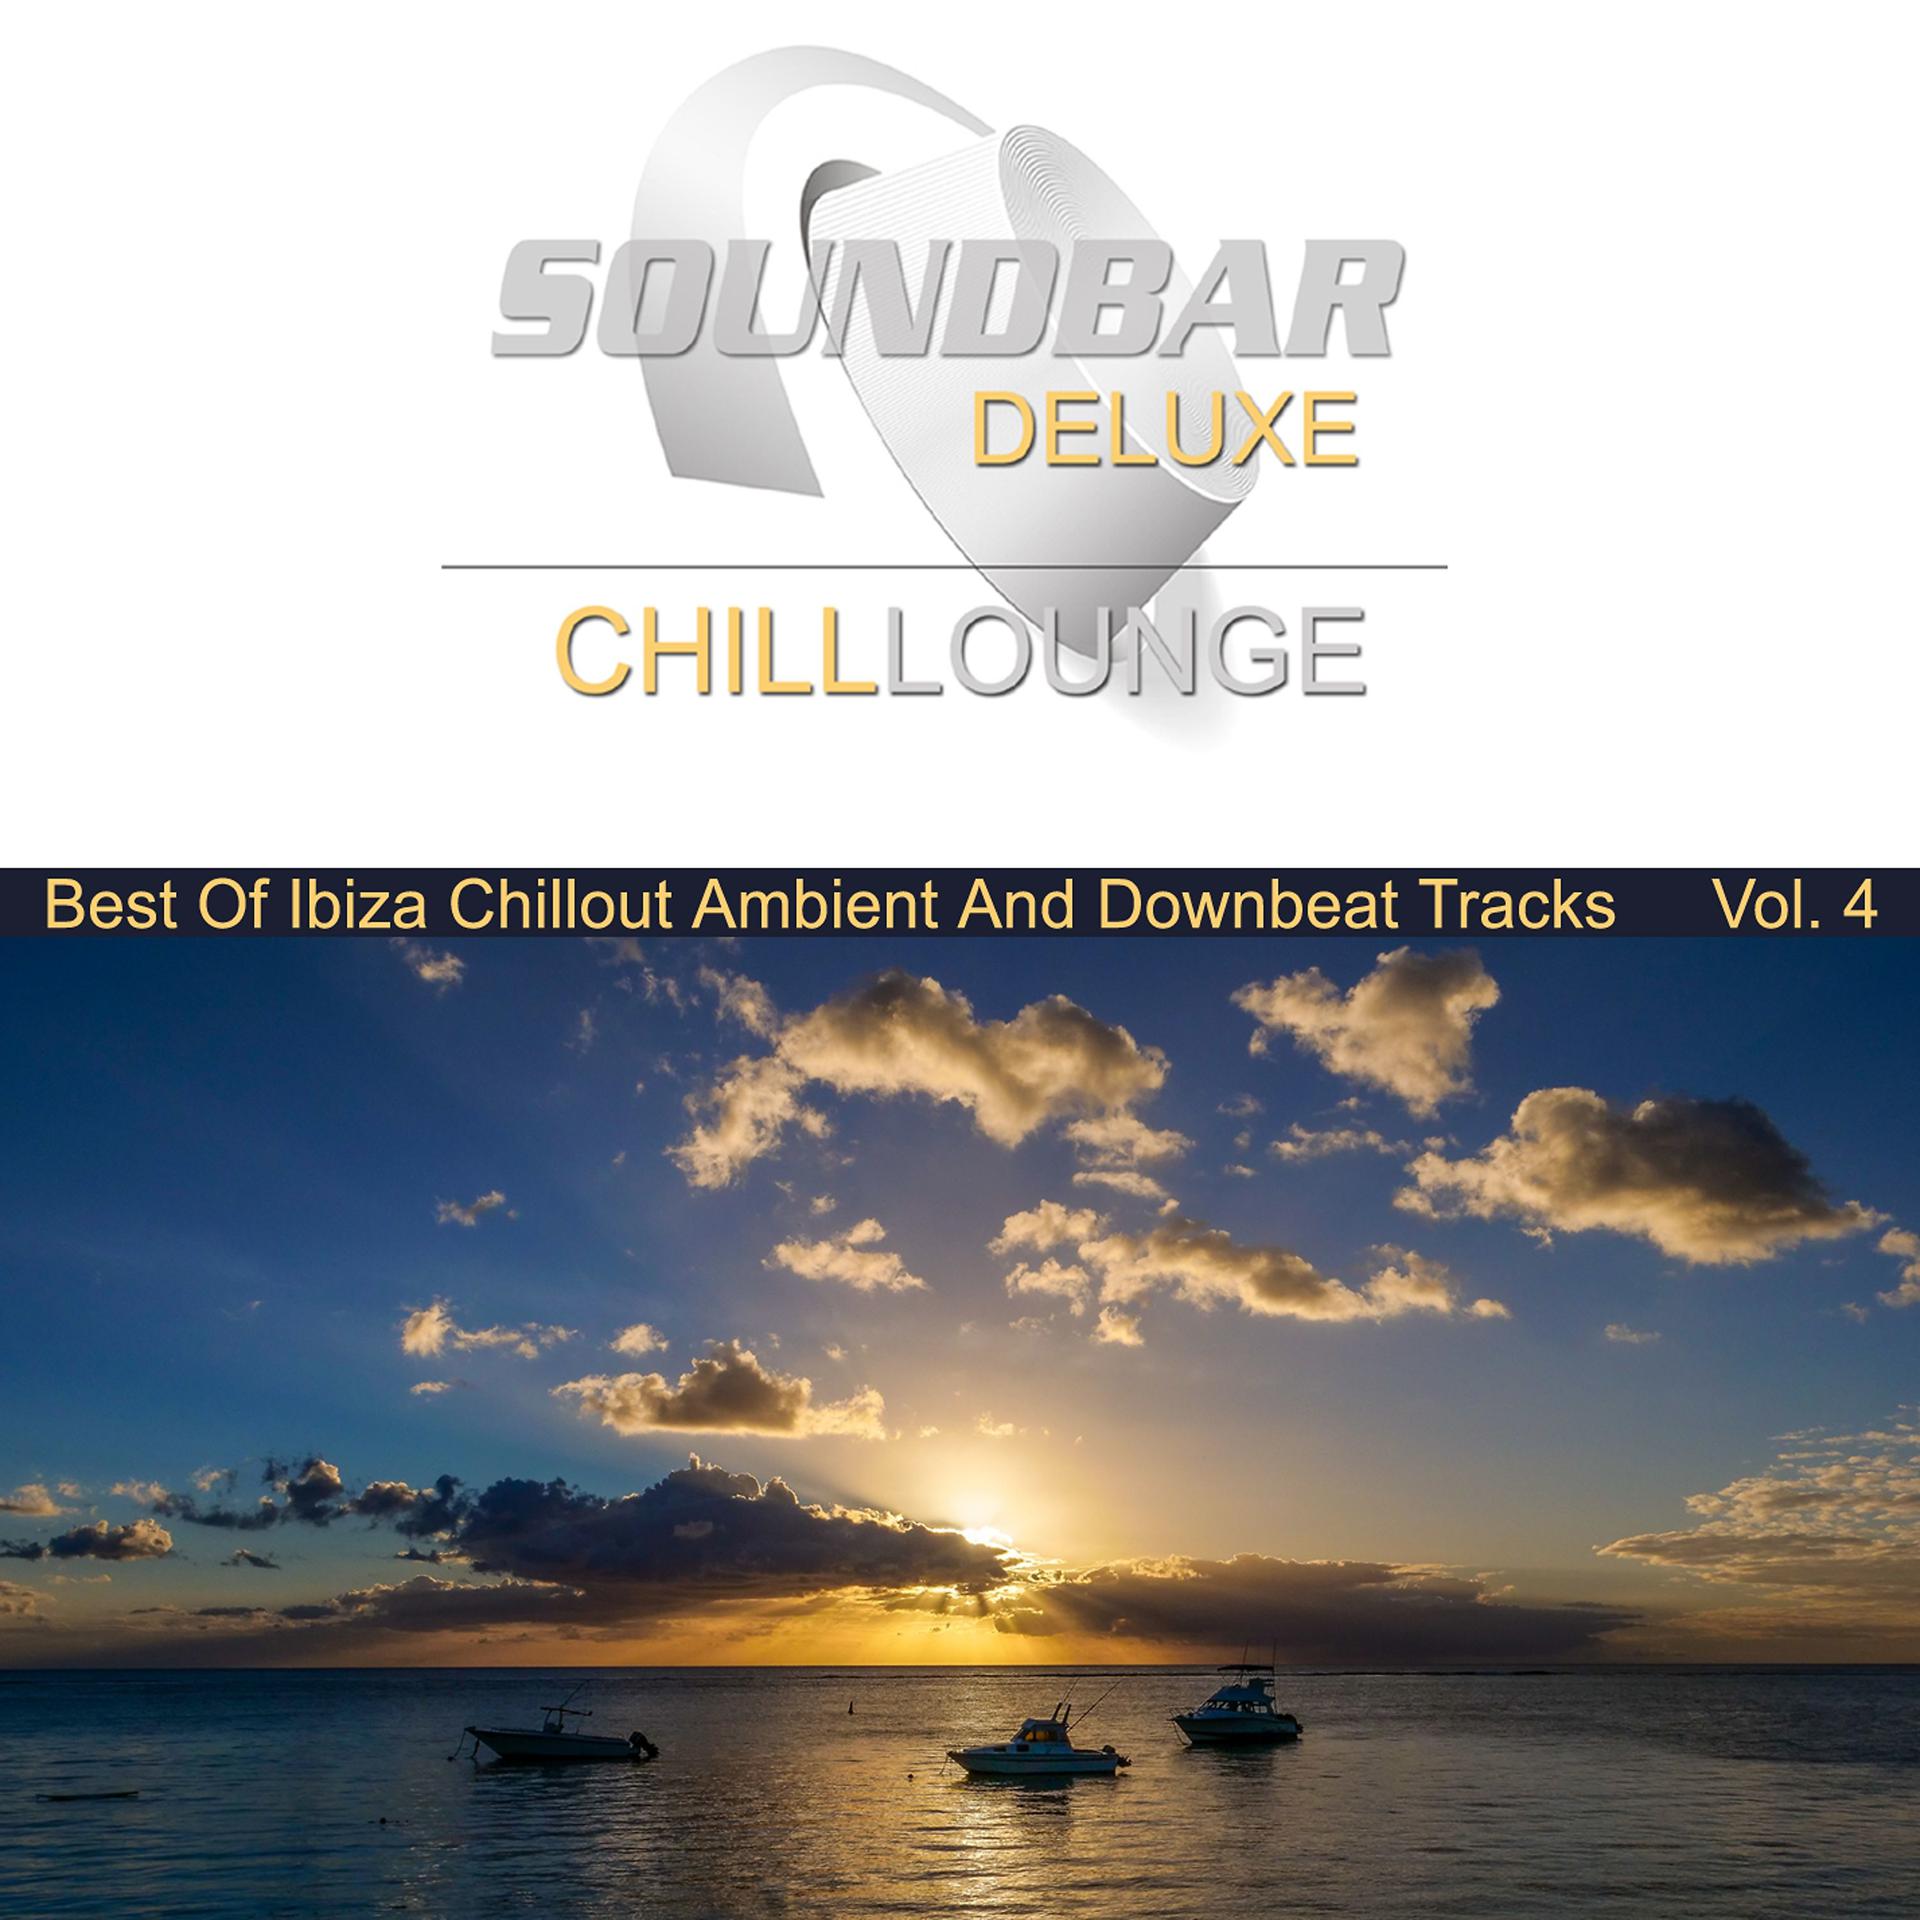 Постер альбома Soundbar Deluxe Chill Lounge, Vol. 4 (Best of Ibiza Chillout Ambient and Downbeat Tracks)